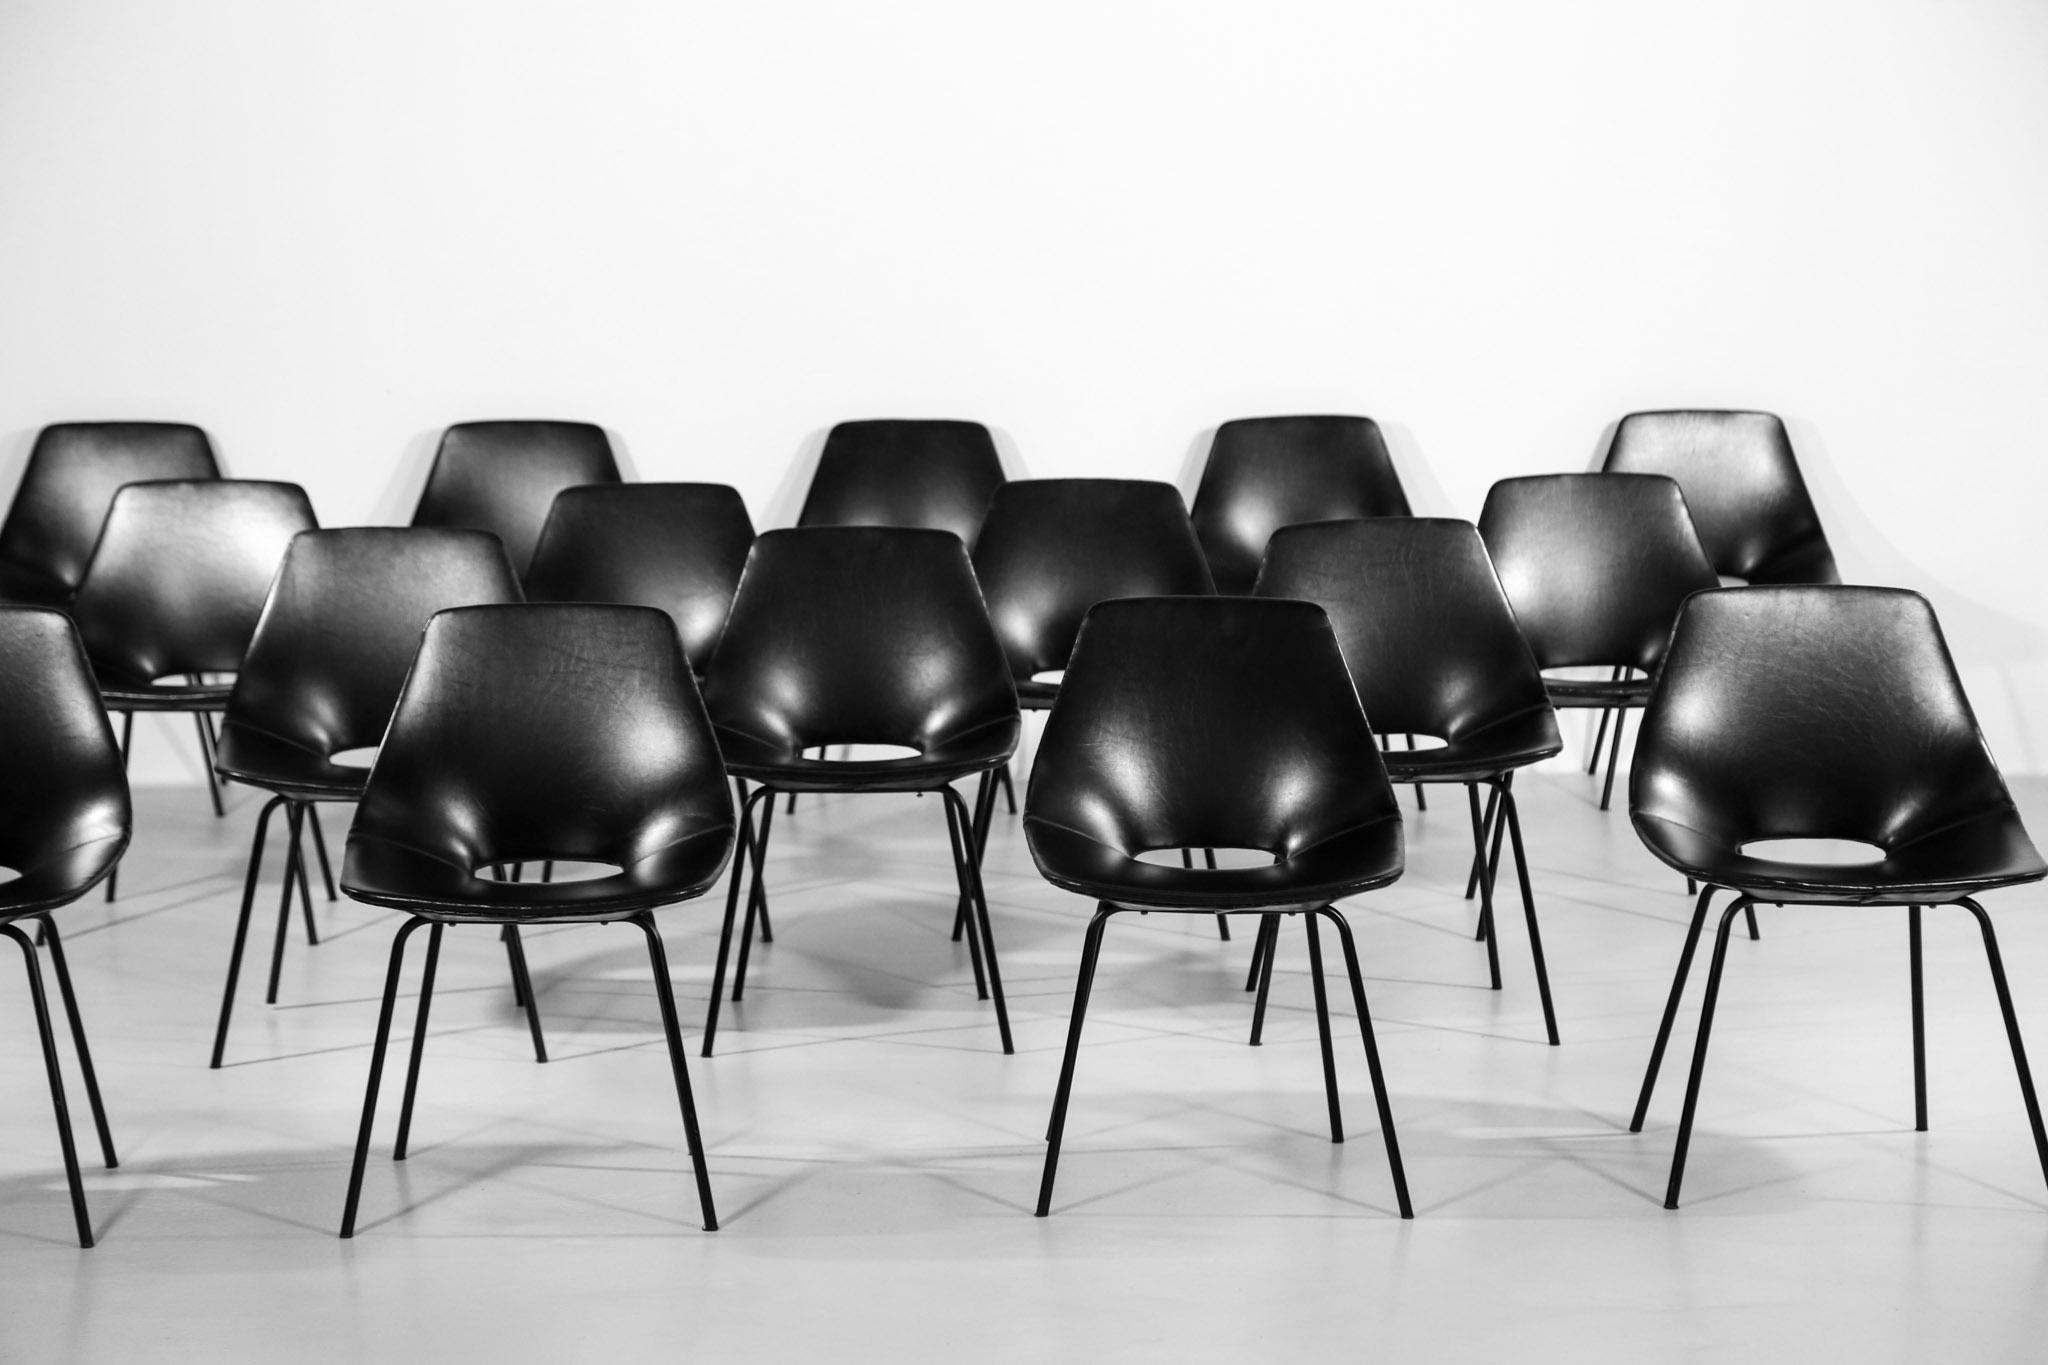 French Tonneau Chairs by Pierre Guariche '16 Chairs'